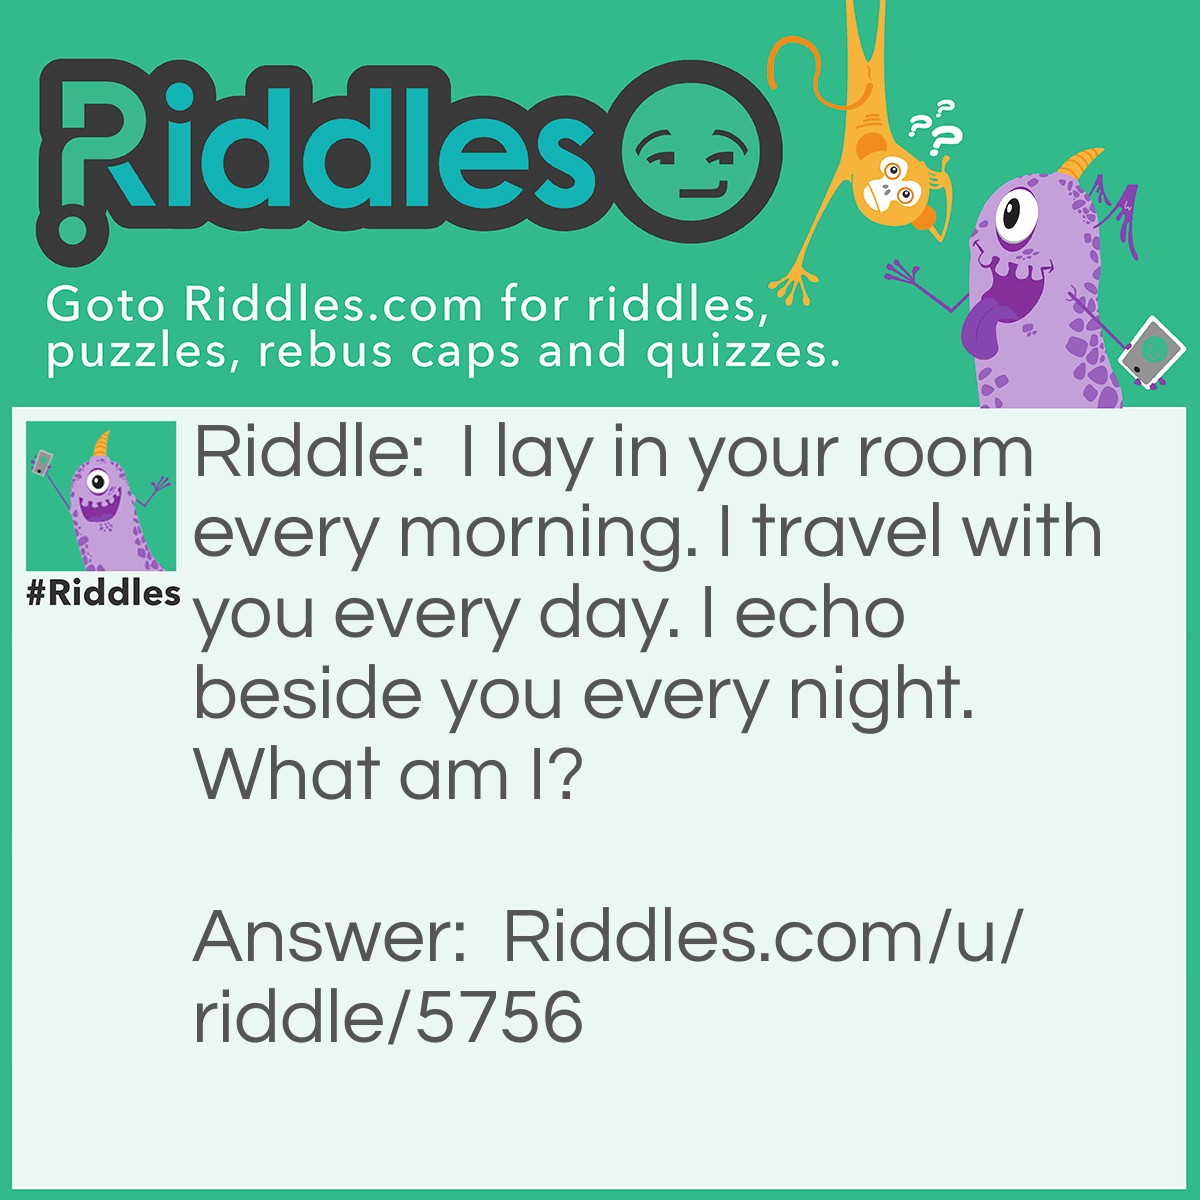 Riddle: I lay in your room every morning. I travel with you every day. I echo beside you every night. What am I? Answer: I am a watch.